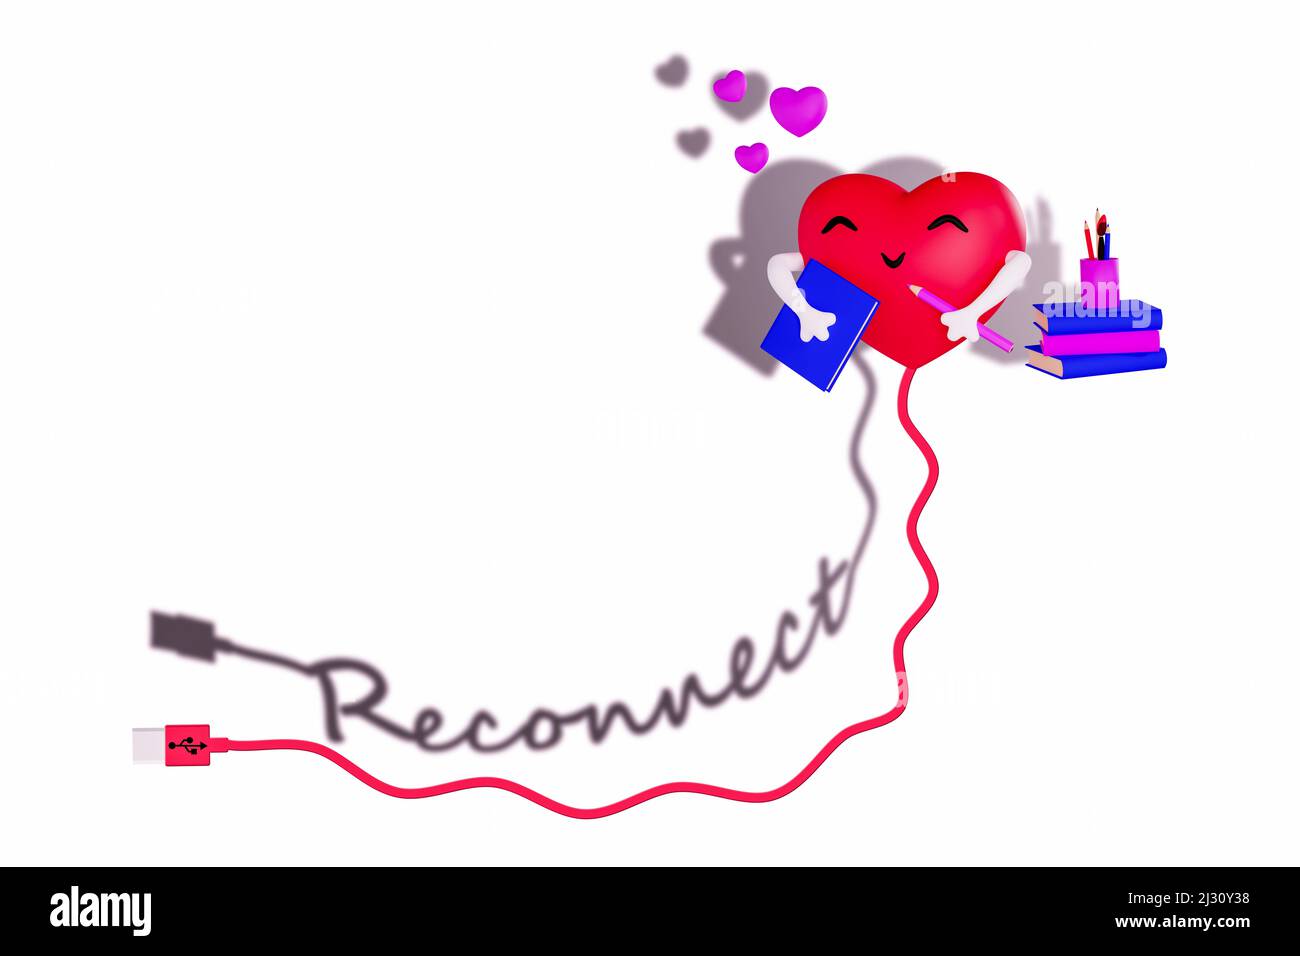 Reconnect to love yourself, digital detox, heart enjoying books and art, 3D illustration Stock Photo